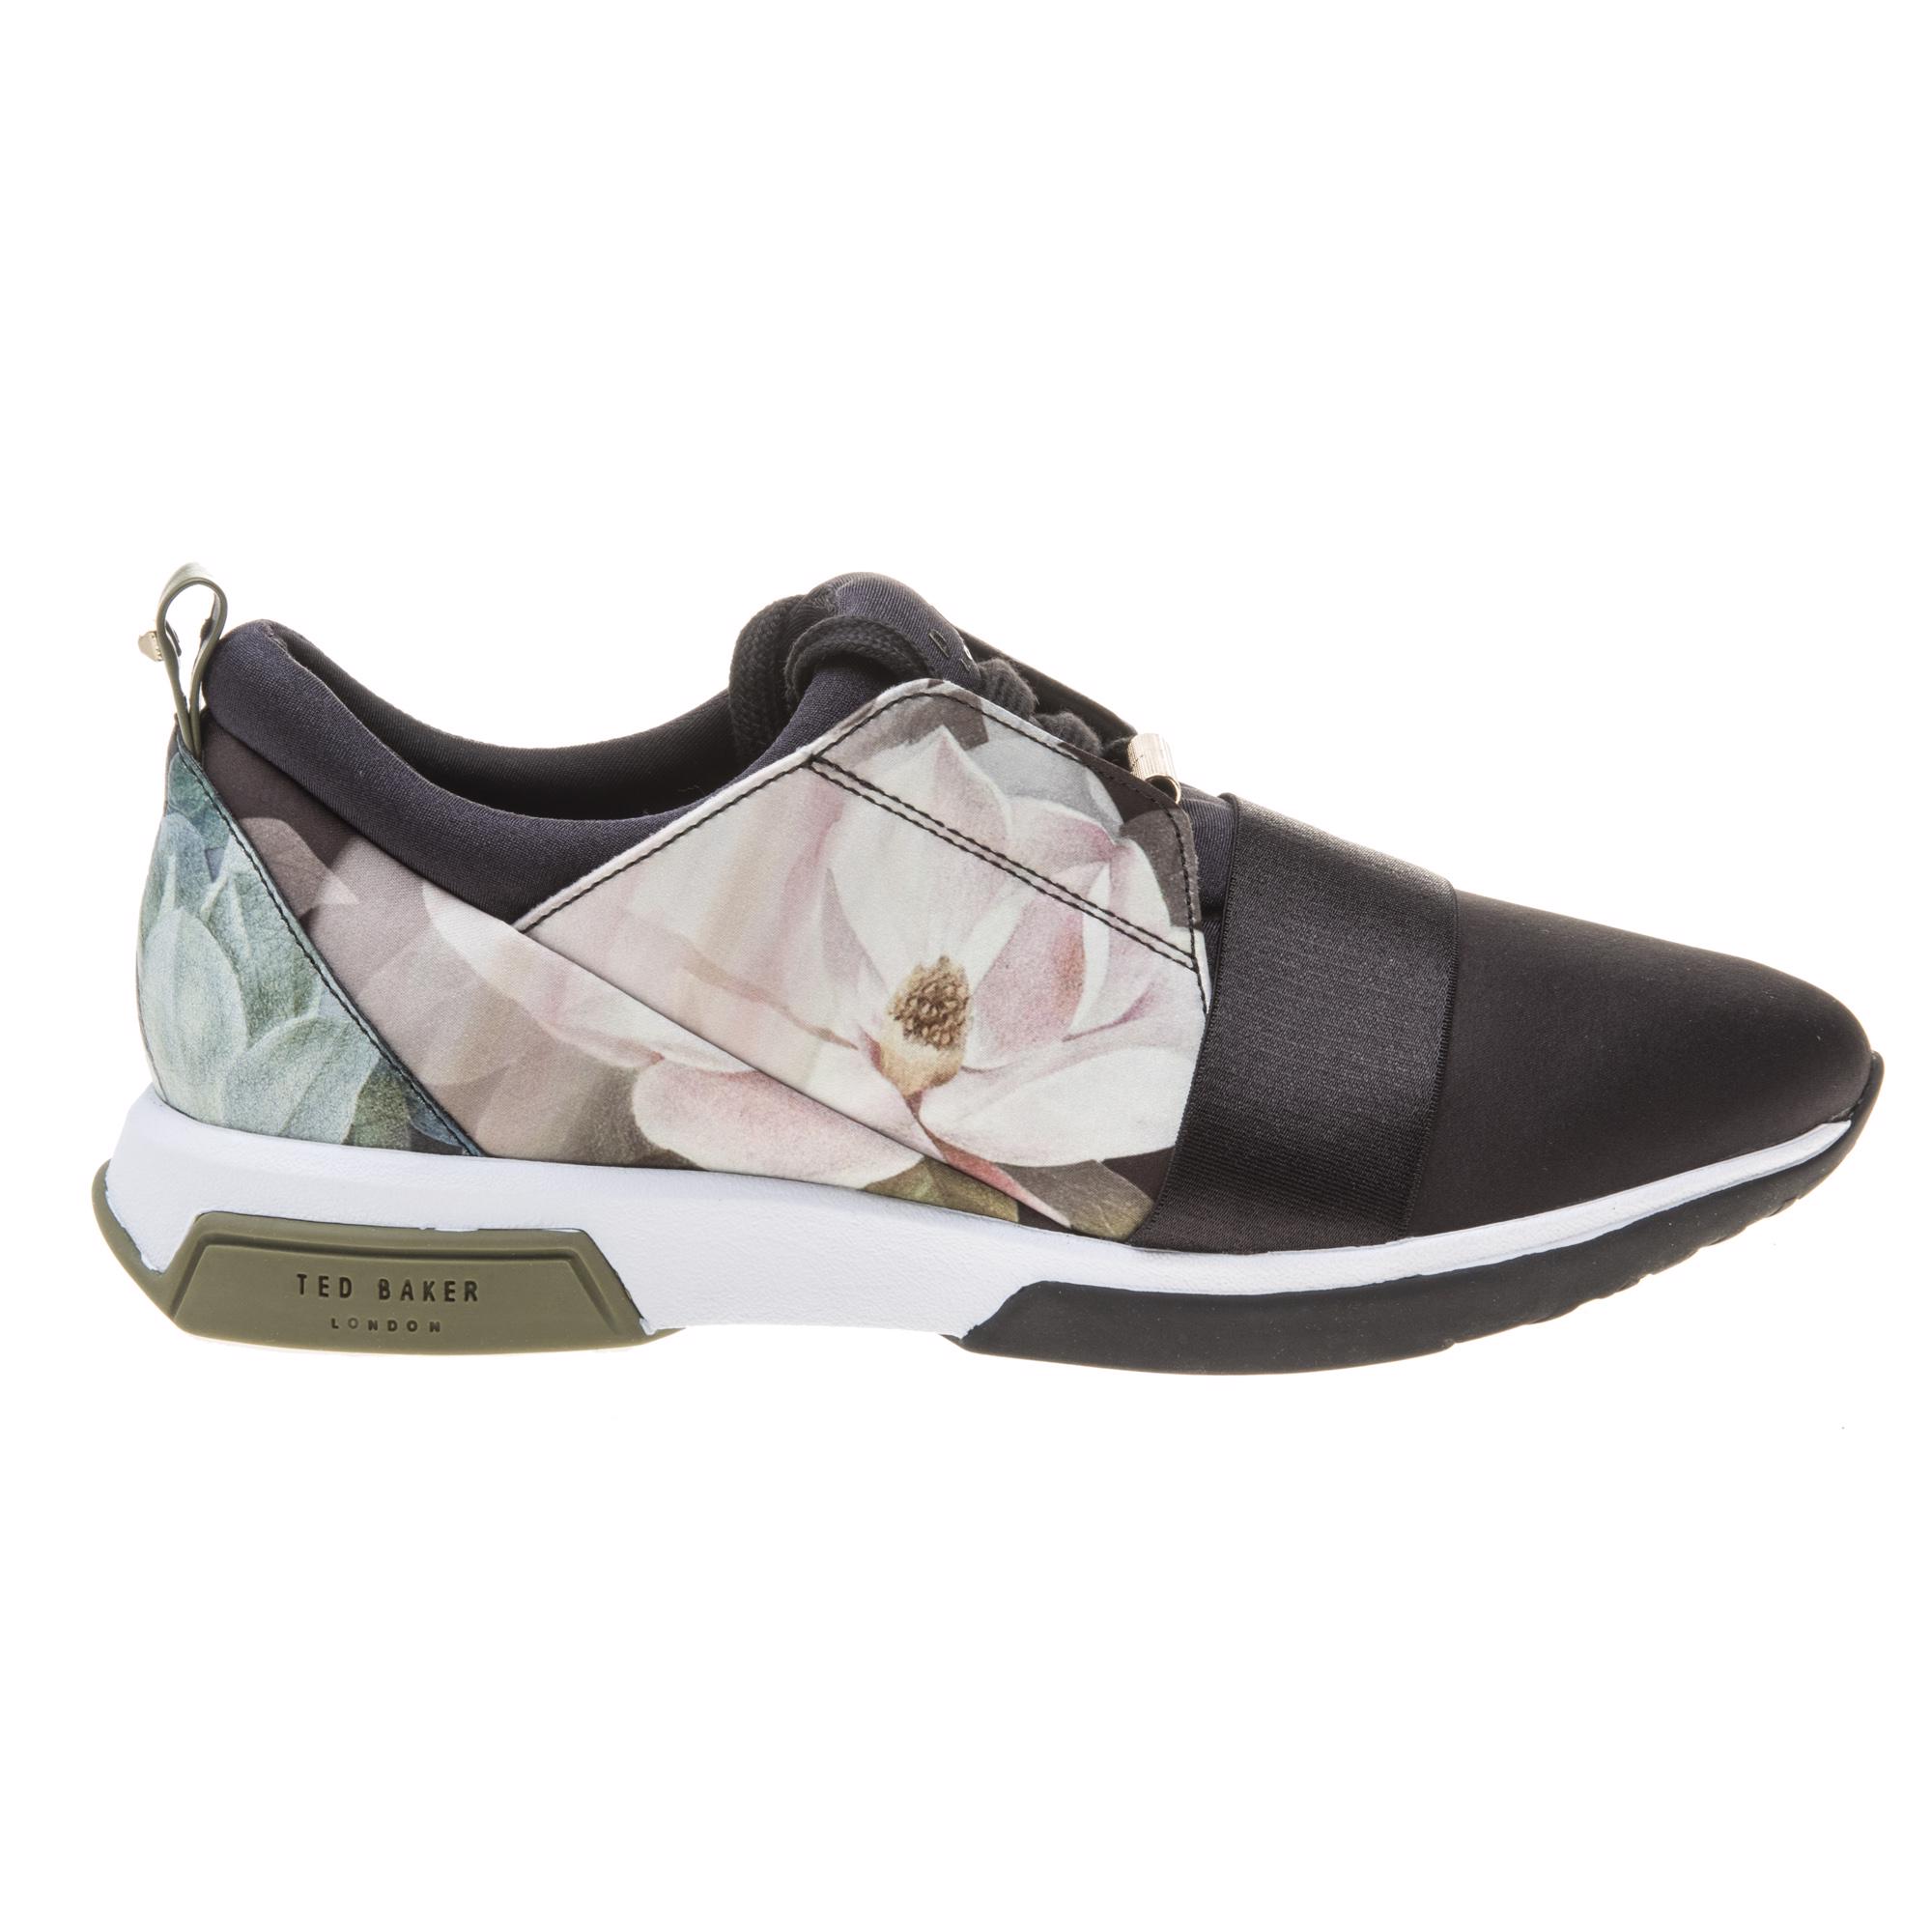 Womens Black Ted Baker Cepap Trainers Soletrader